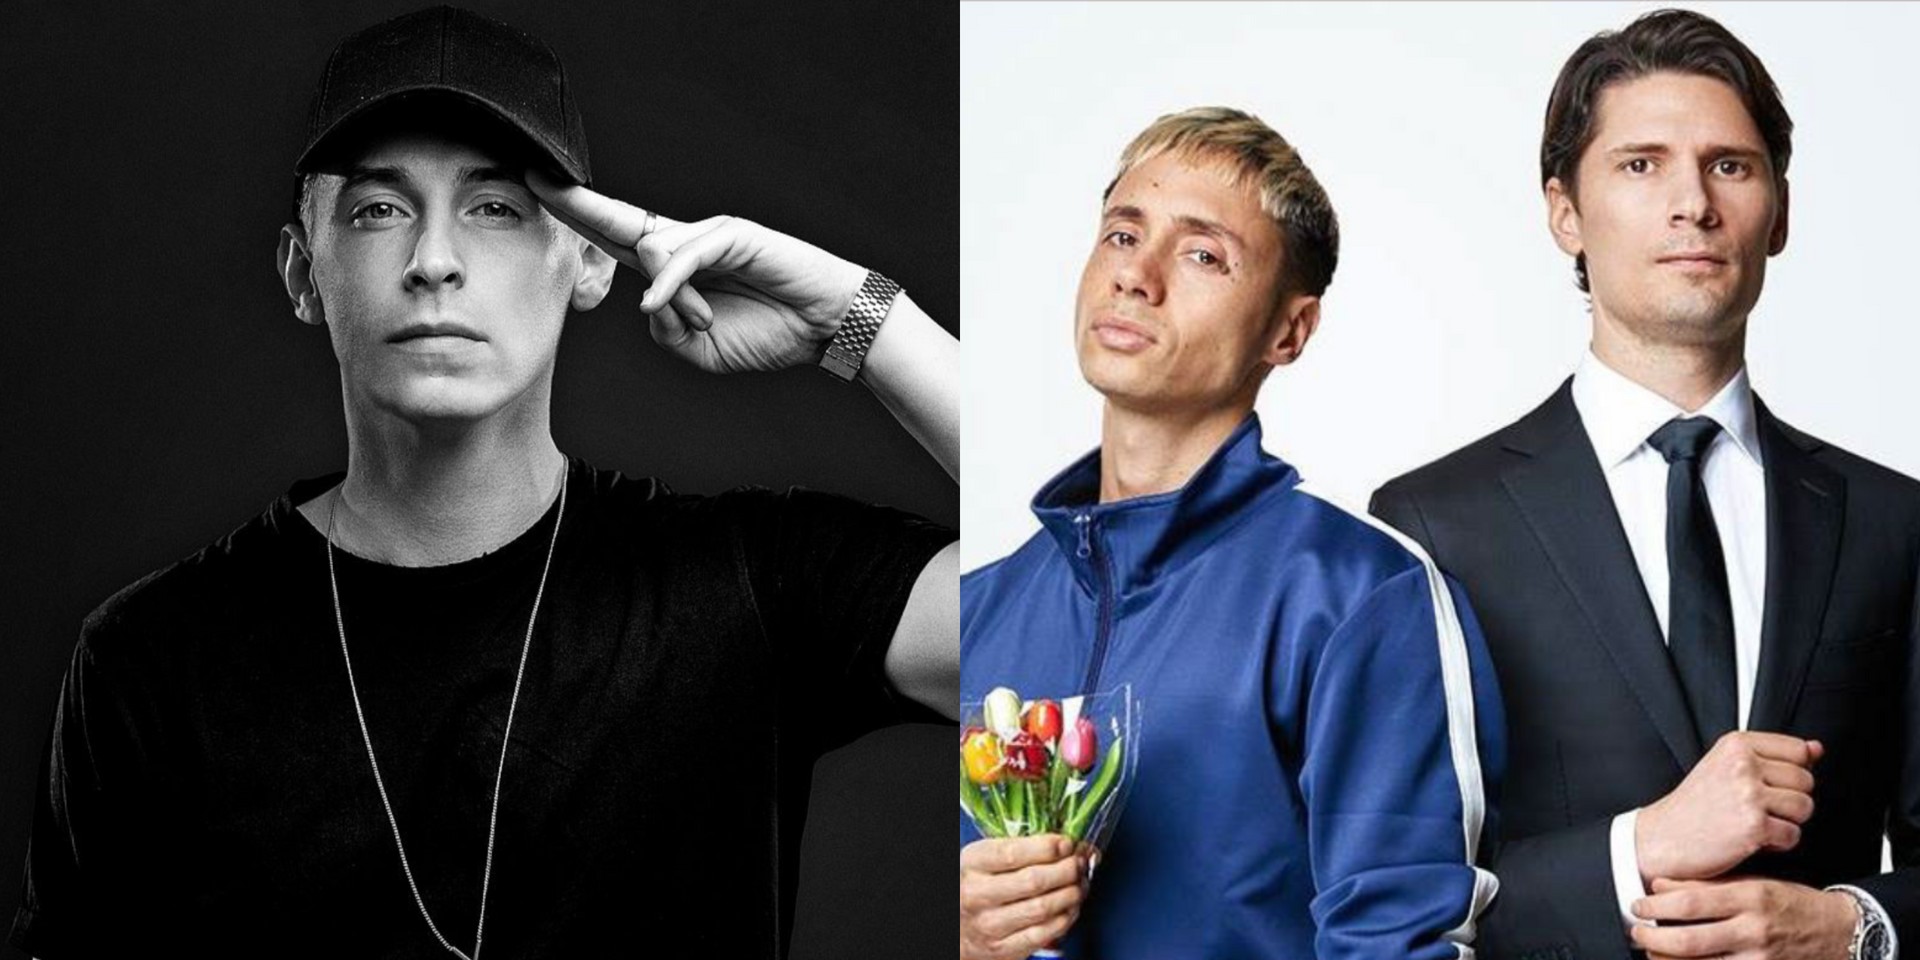 Djakarta Warehouse Project 2019 announces Phase 2 line-up – Coone, Bassjackers and more to perform 